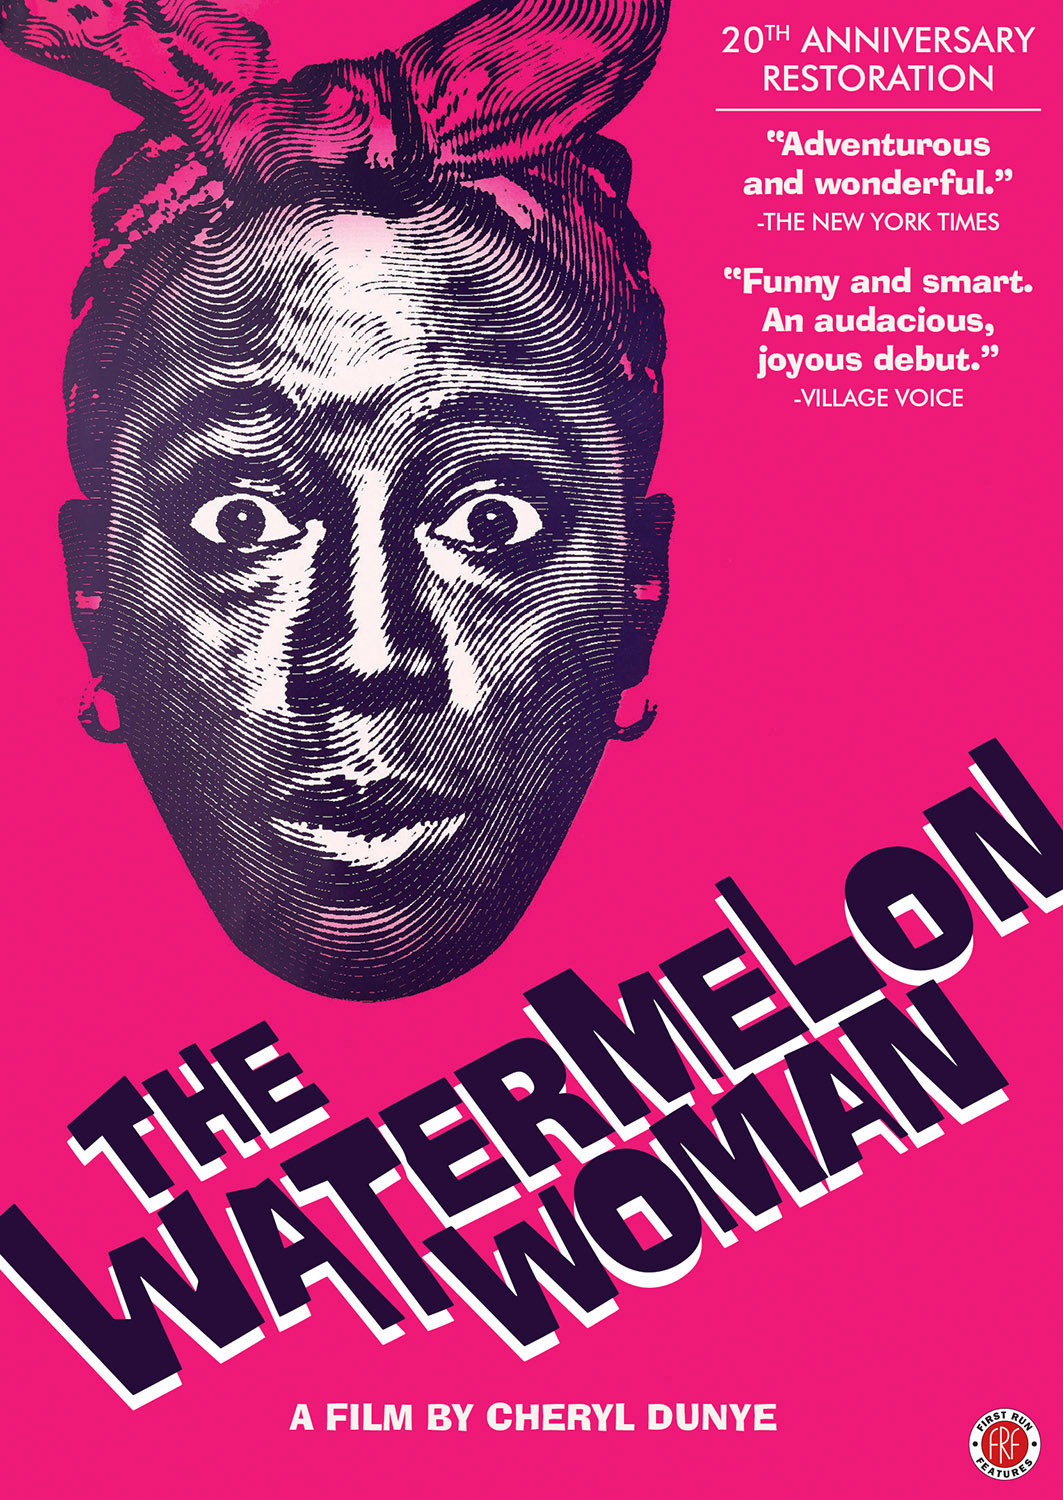 A poster for the 20th anniversary of The Watermelon Woman.